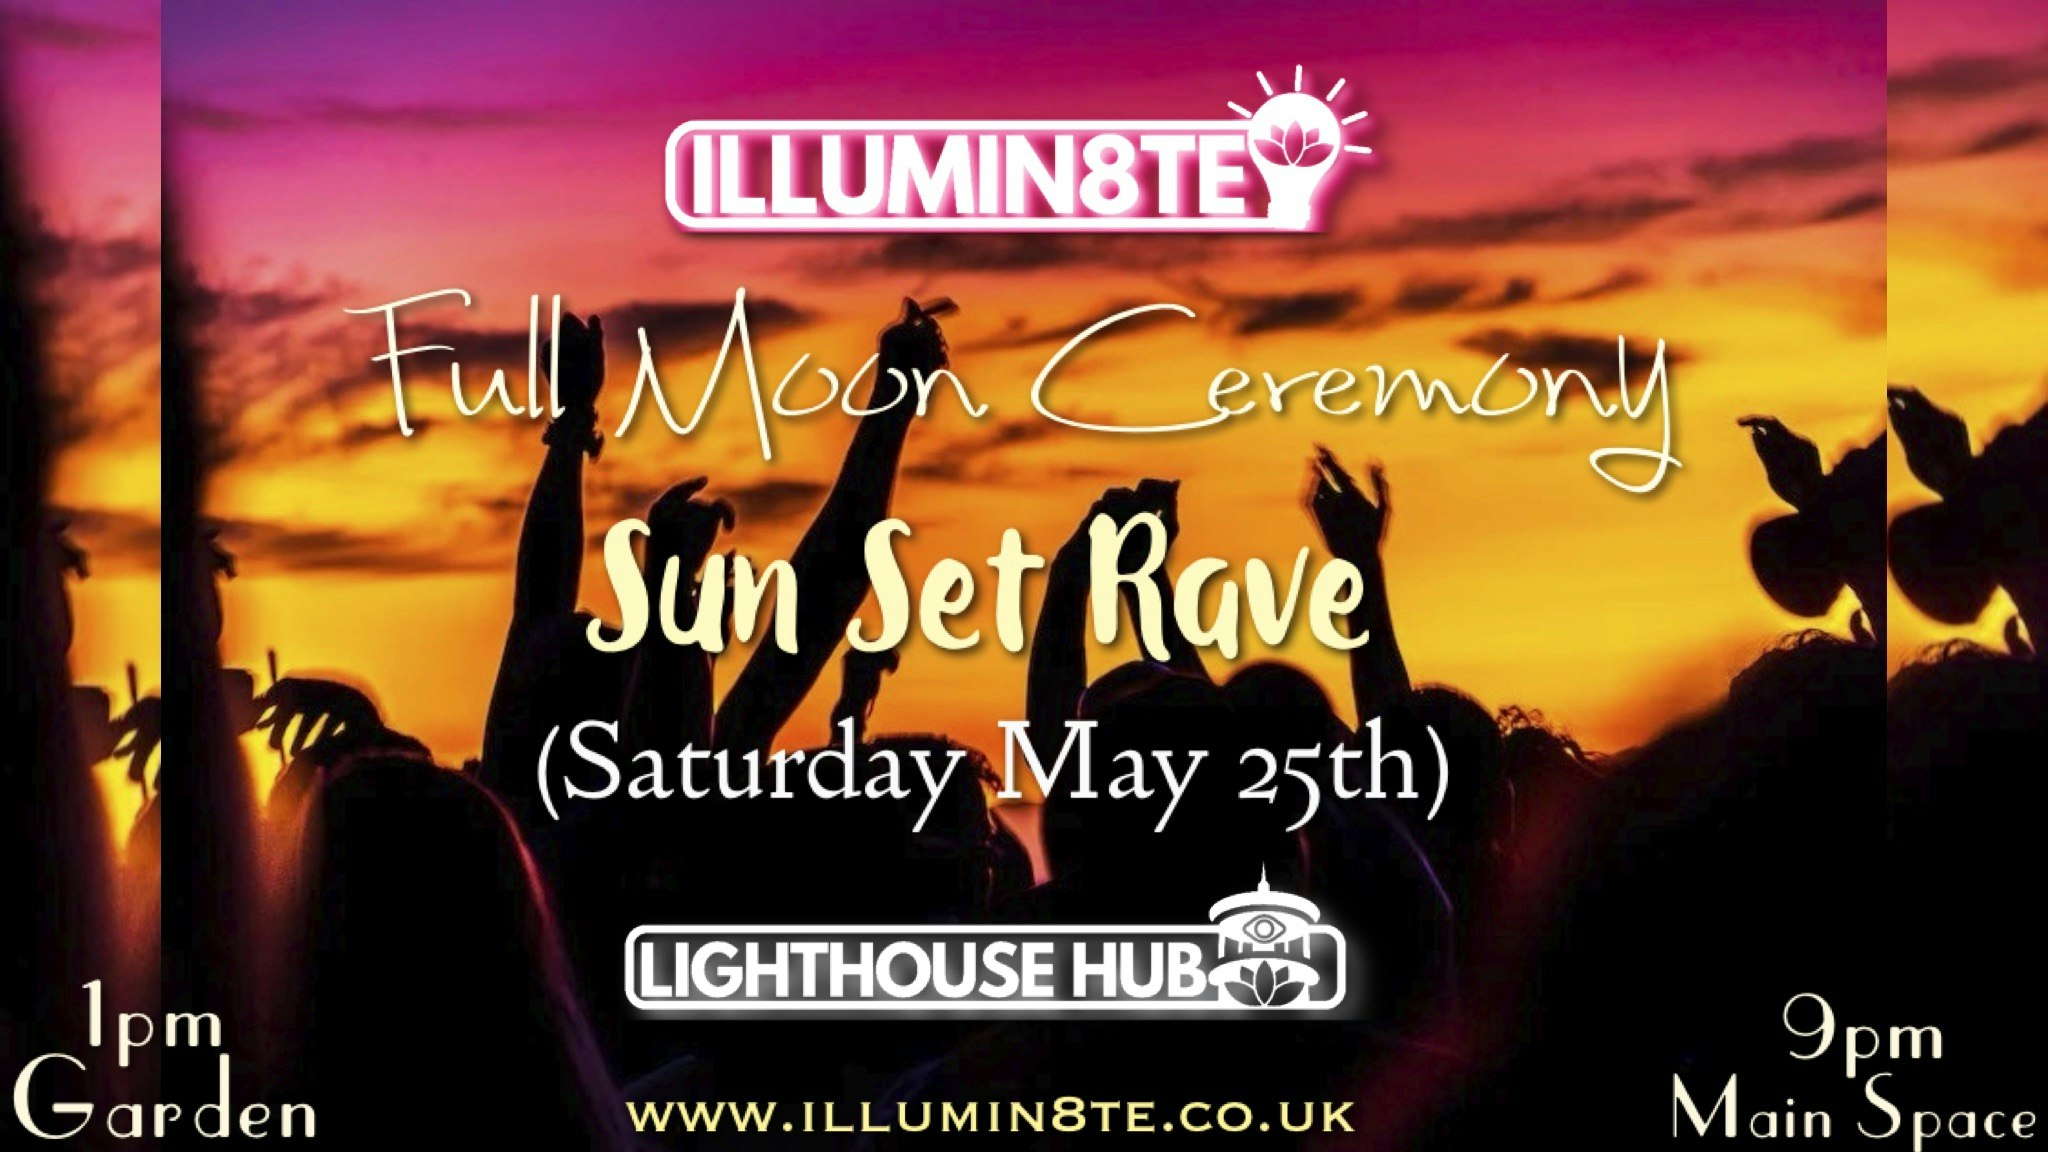 Illumin8te Presents Full Moon Ceremony / Sun Set Rave “Magic Over 2 Sacred Spaces (Saturday 25th May) @ The Lighthouse Hub